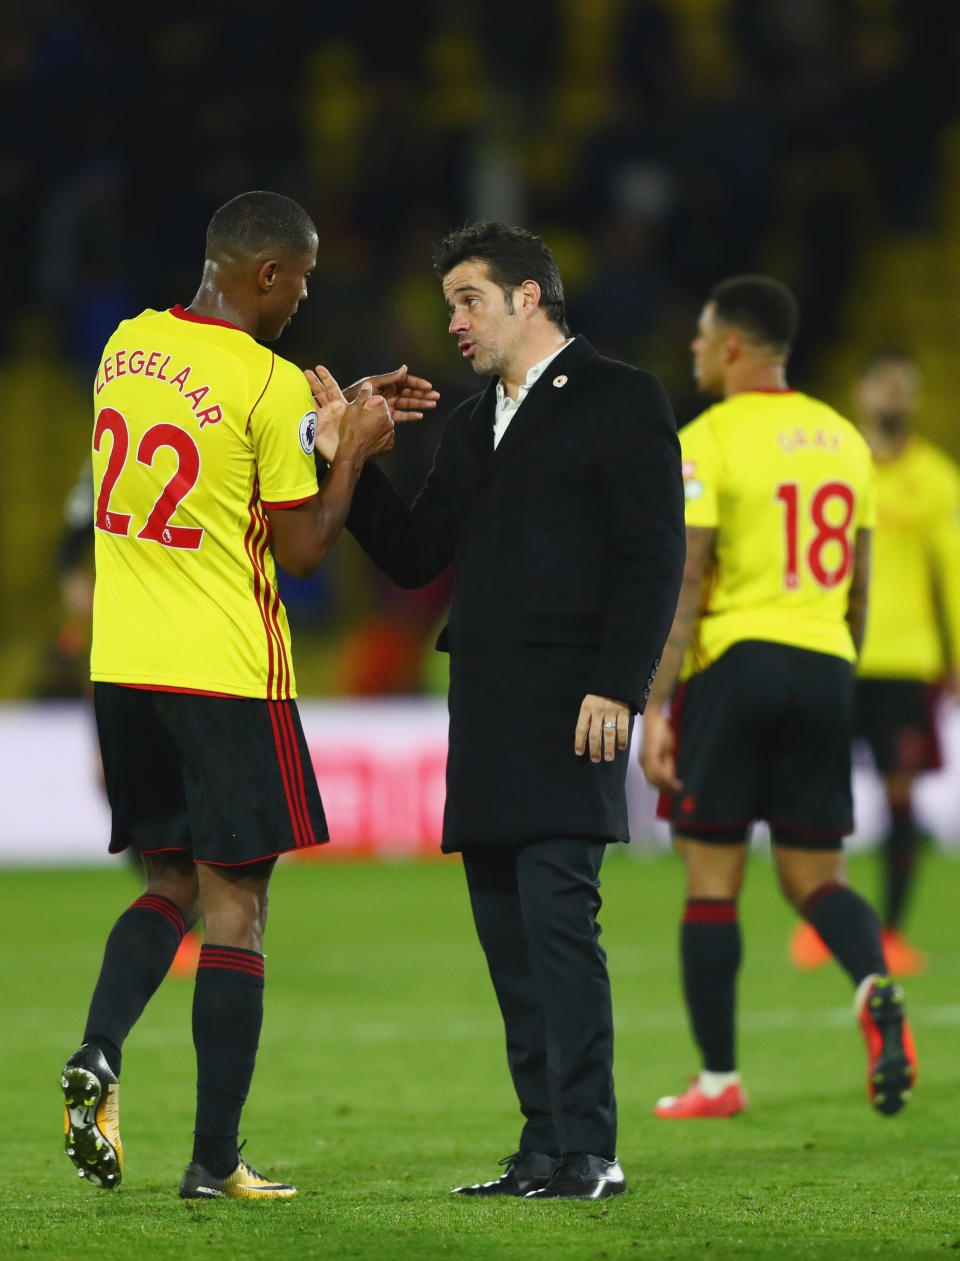 Marco Silva has shown faith in his players – and they have responded